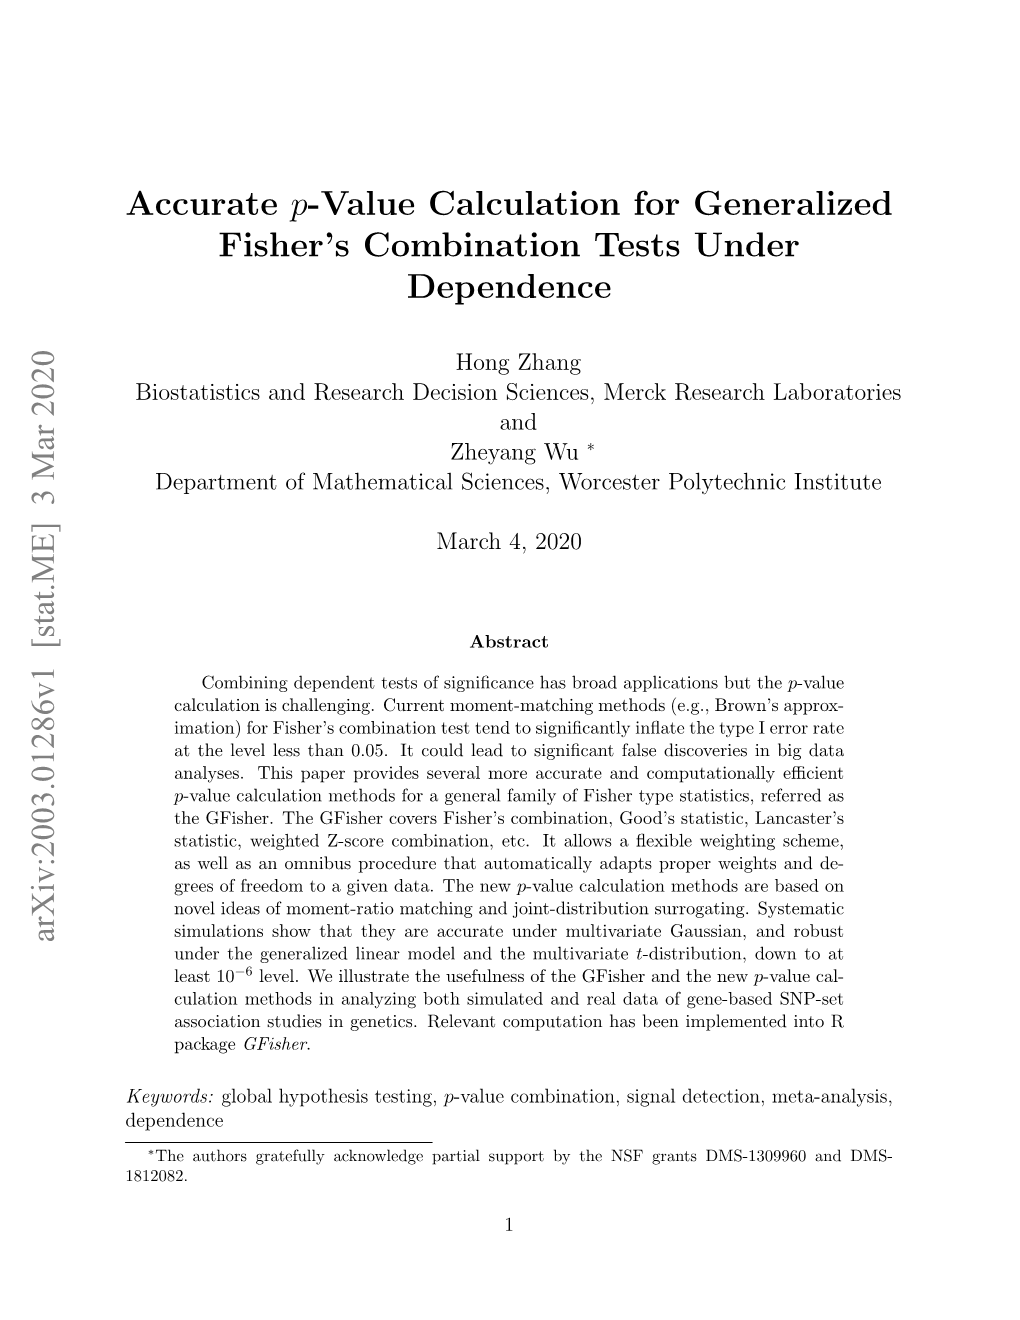 Accurate P-Value Calculation for Generalized Fisher's Combination Tests Under Dependence Arxiv:2003.01286V1